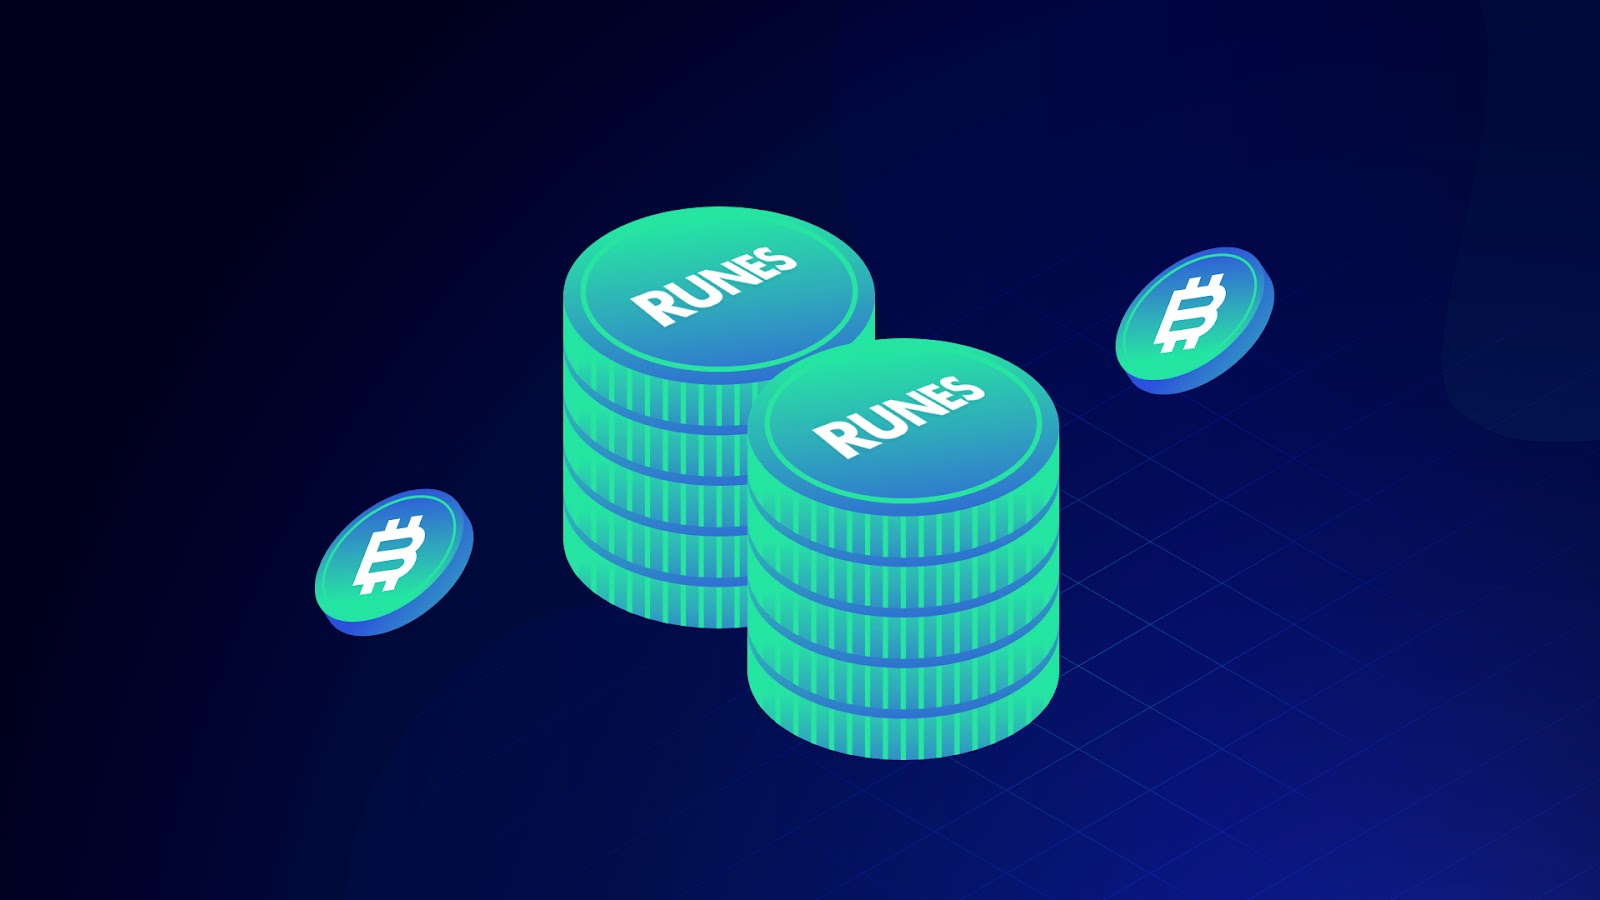 Runes Transactions Account for Over Two-Thirds of Bitcoin Activity Since Its Debut